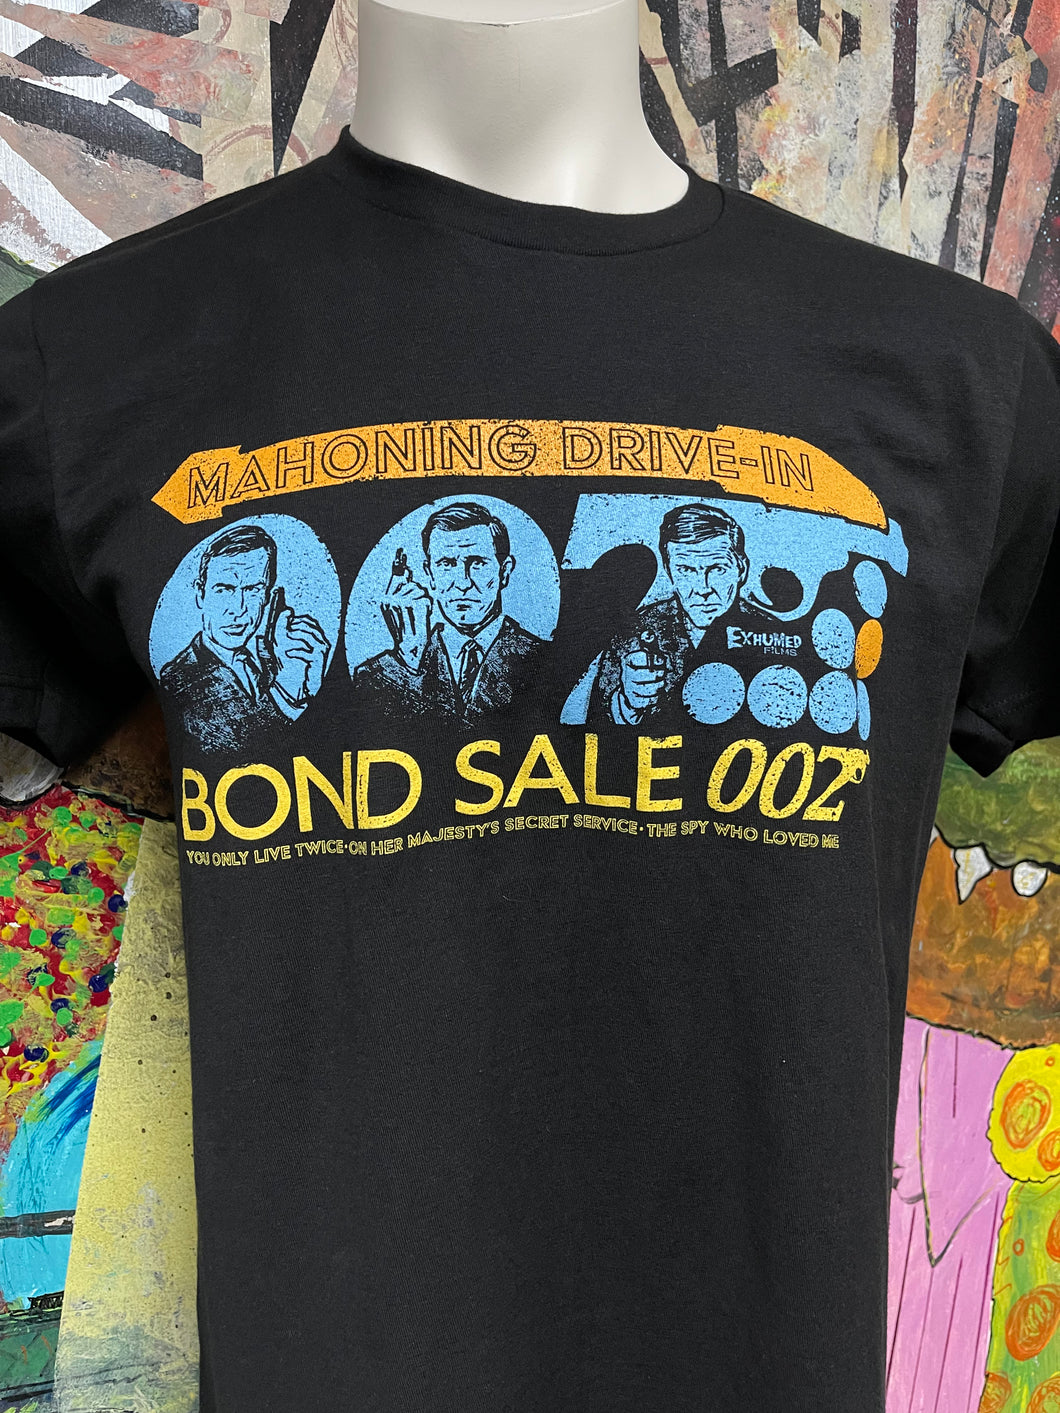 Mahoning Drive-In - James Bond event tee